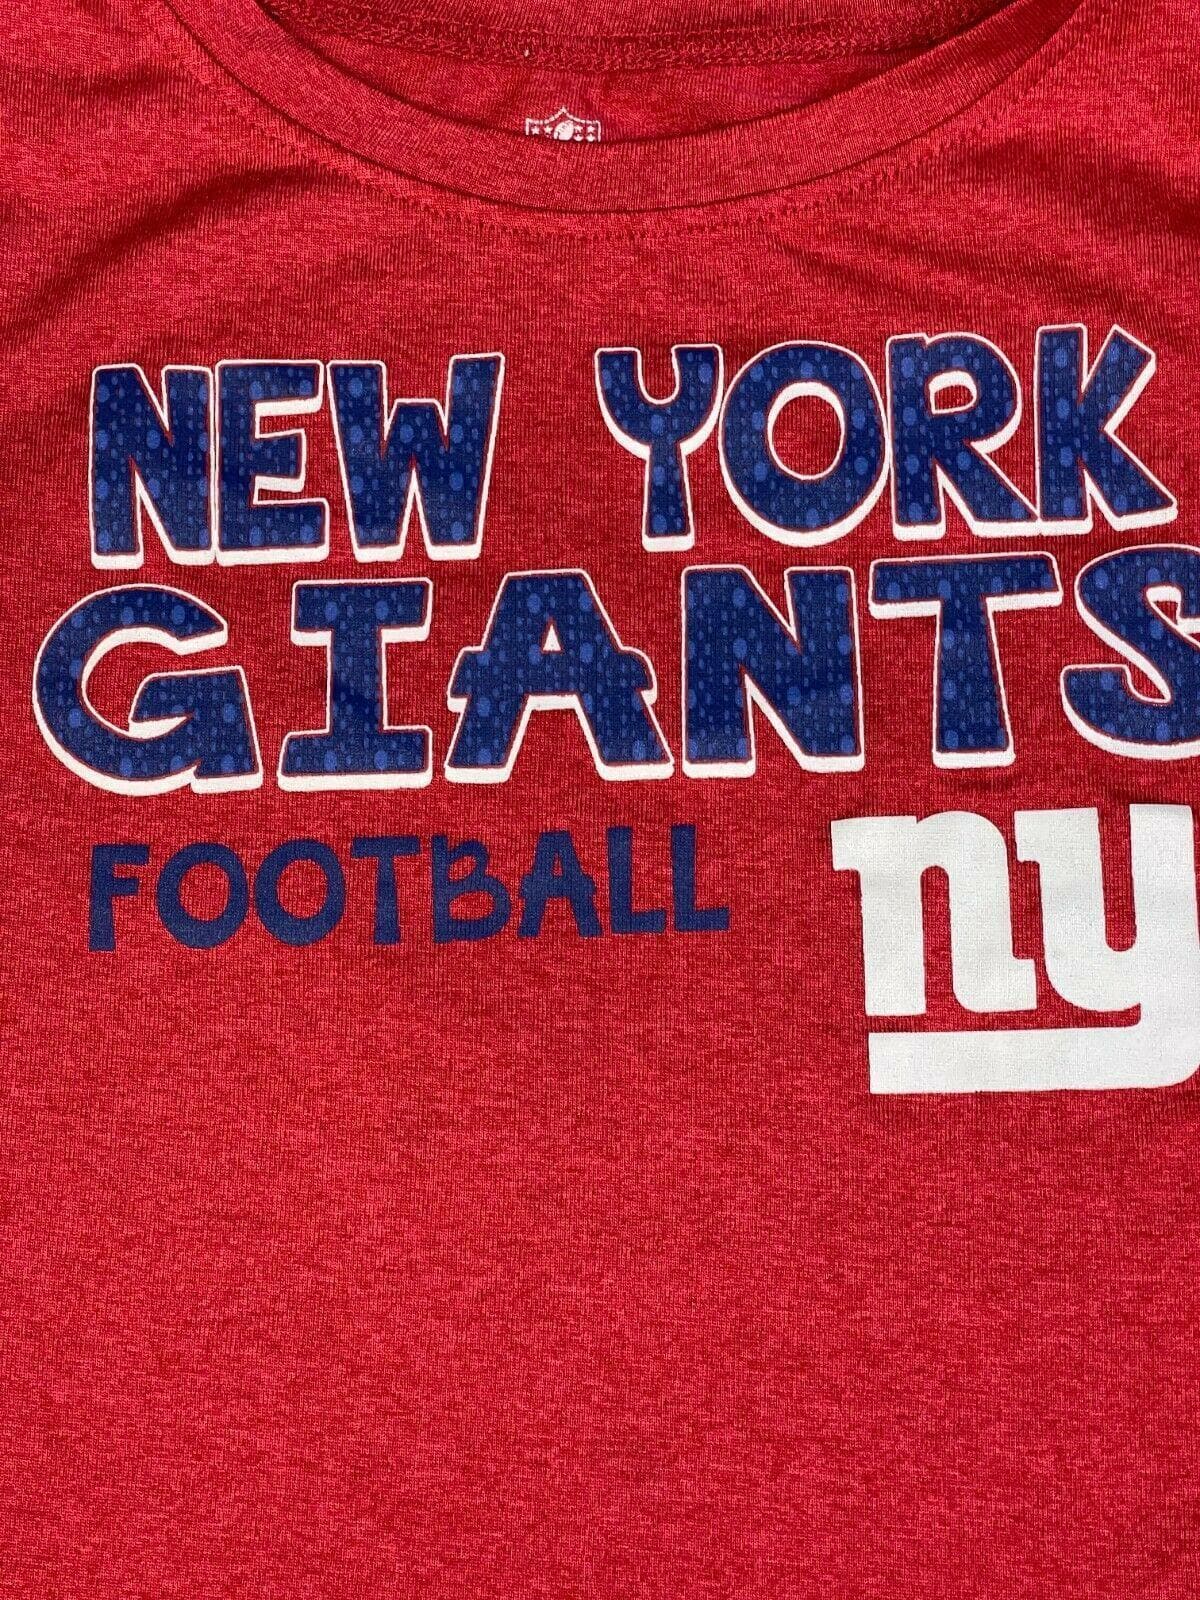 NFL New York Giants Wicking Style T-Shirt Toddler 4T